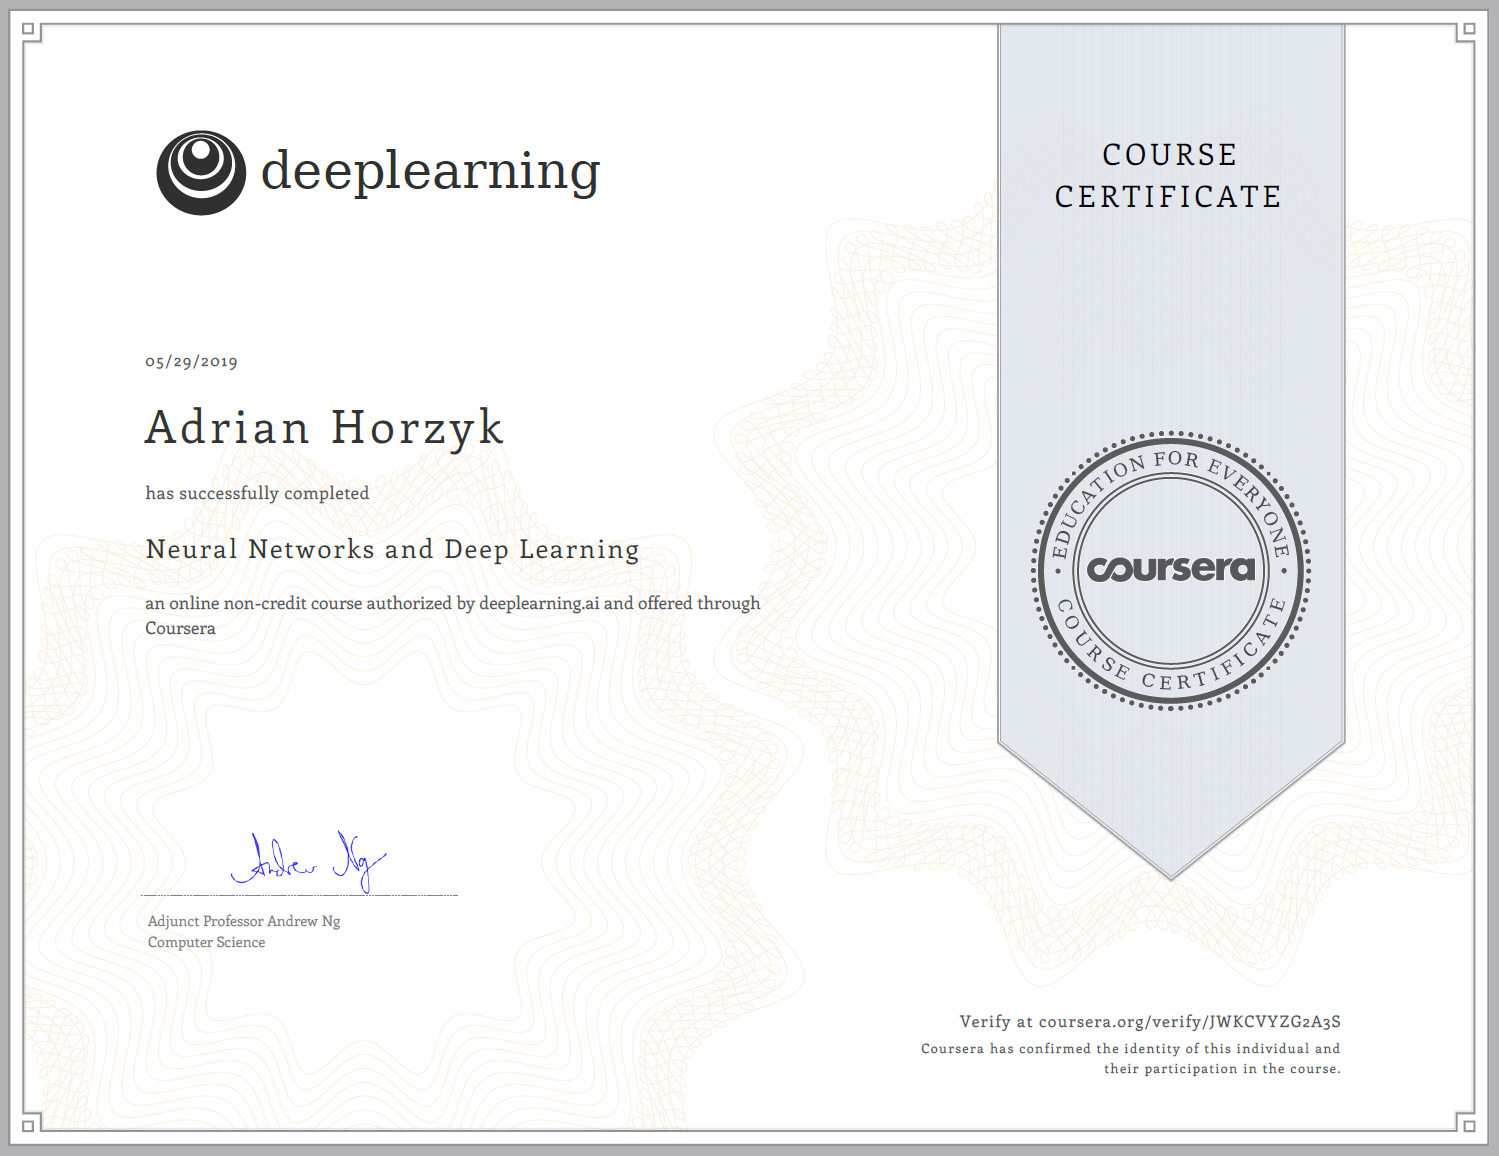 machine learning online course certificate